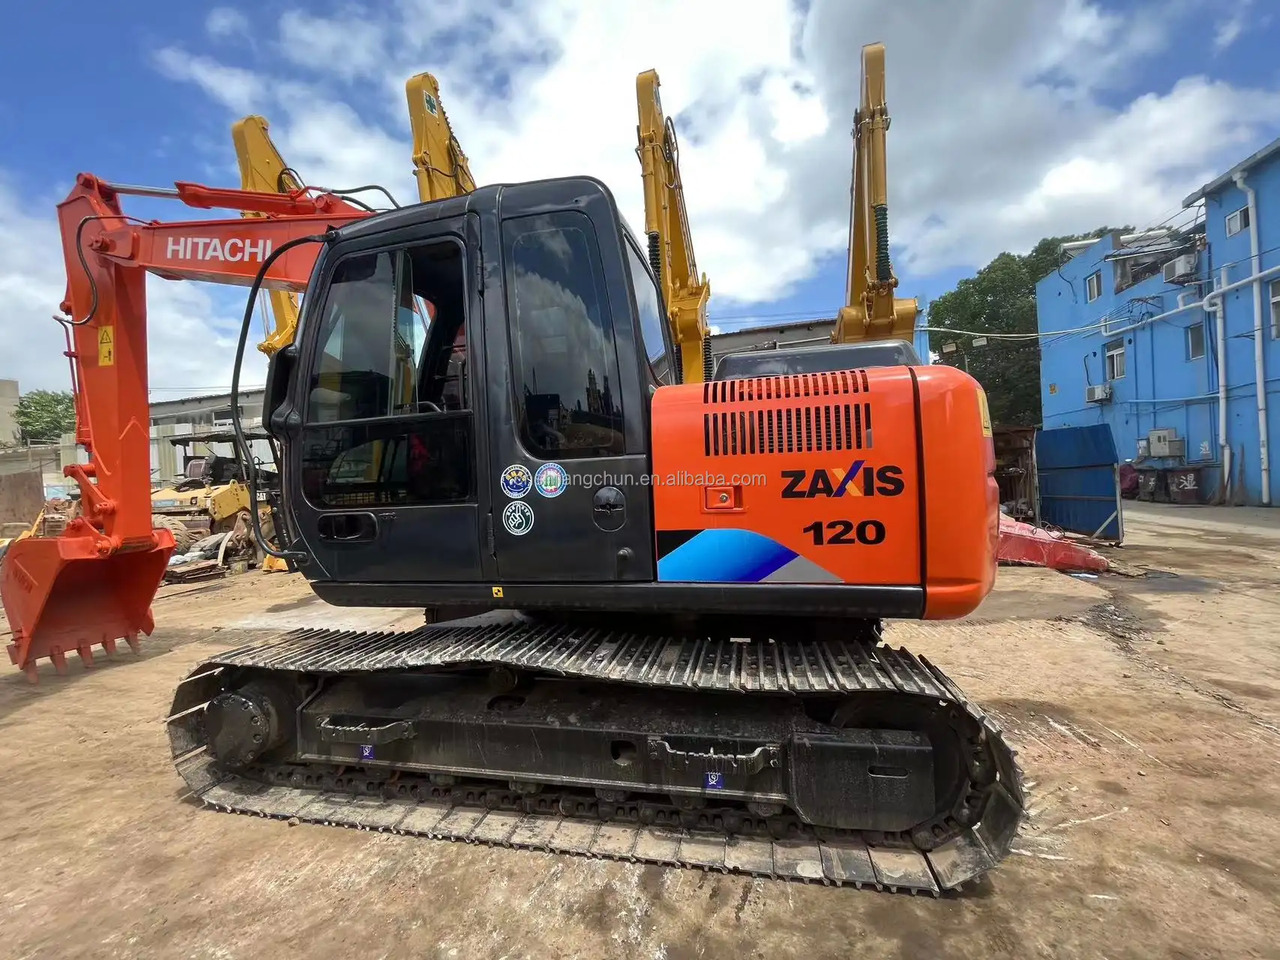 Pelle Best Price Used Hitachi 120 Excavator Hot Sell Hitachi Zx120 With High Working Perfroance: photos 6